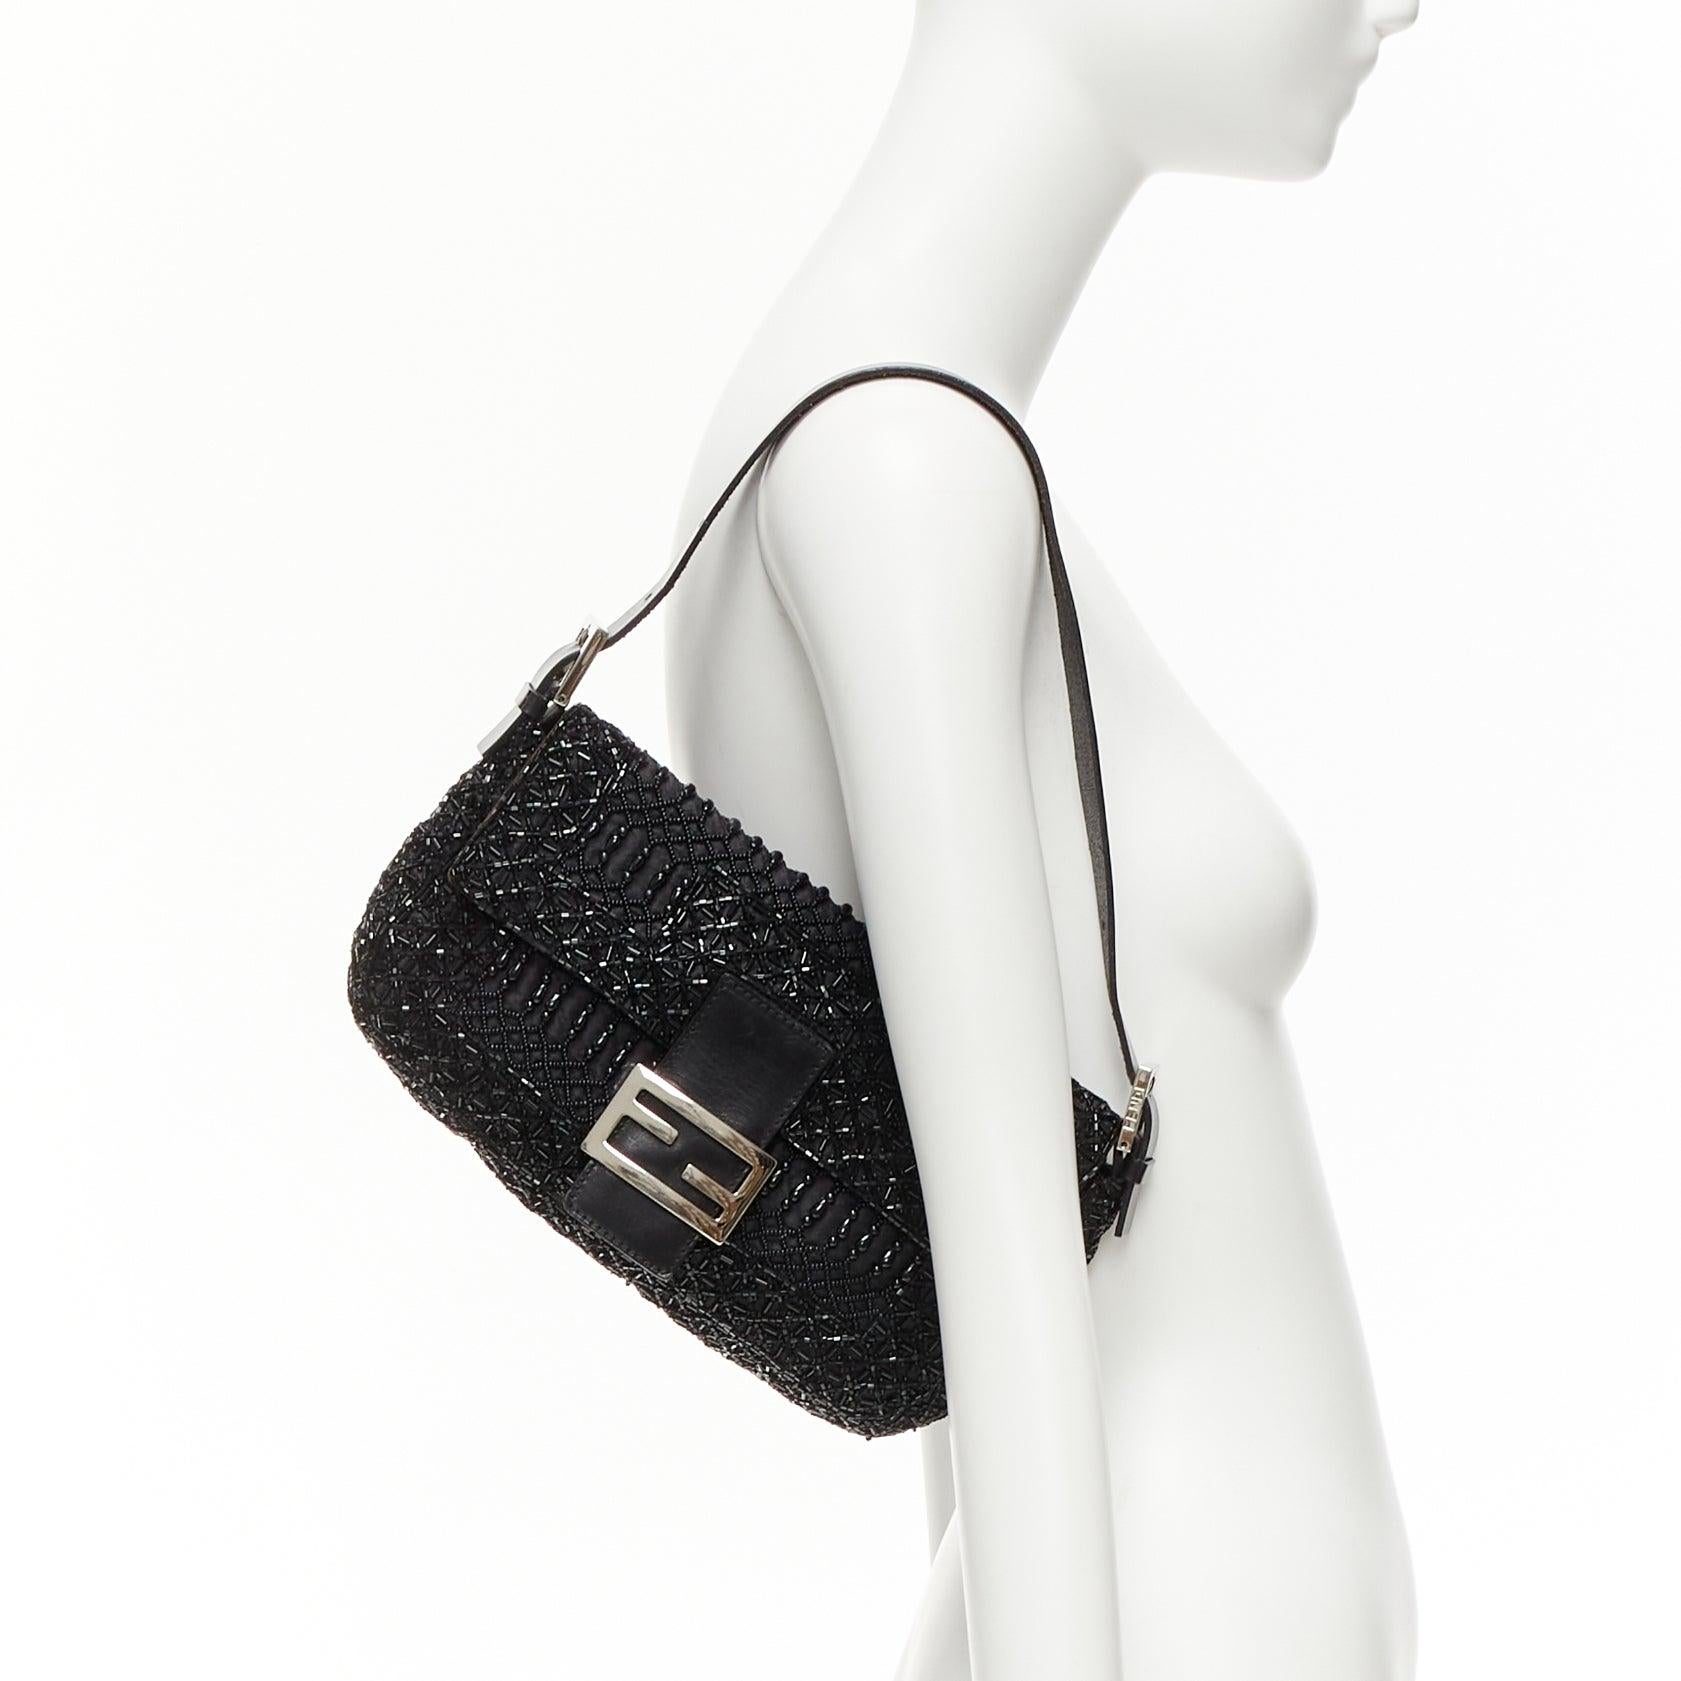 FENDI Baguette Vintage black intricate beaded FF logo black leather buckle bag
Reference: TGAS/D01136
Brand: Fendi
Model: Baguette
Material: Fabric, Leather
Color: Black, Silver
Pattern: Crystals
Closure: Snap Buttons
Lining: Brown Fabric
Extra